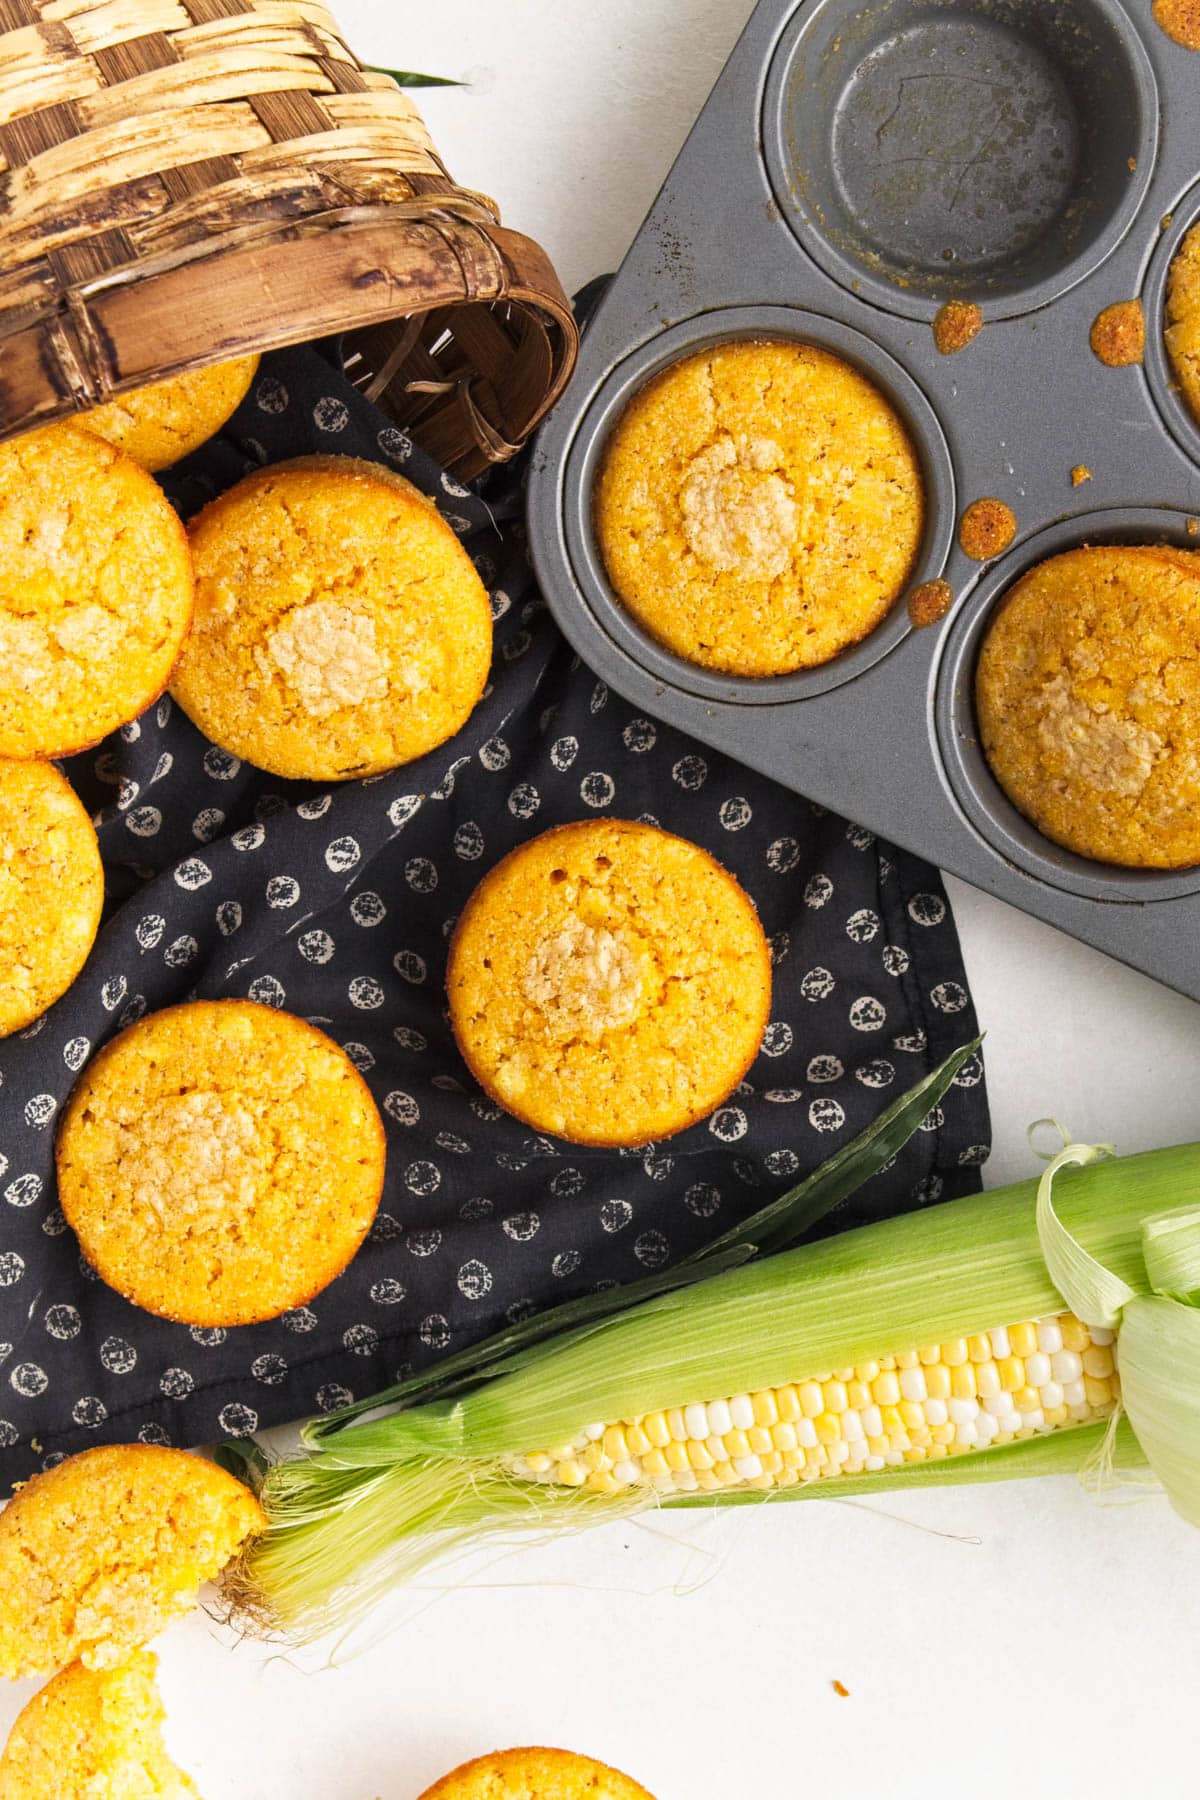 Place the cornbread muffins on a black napkin and line the muffin tins with the corn.